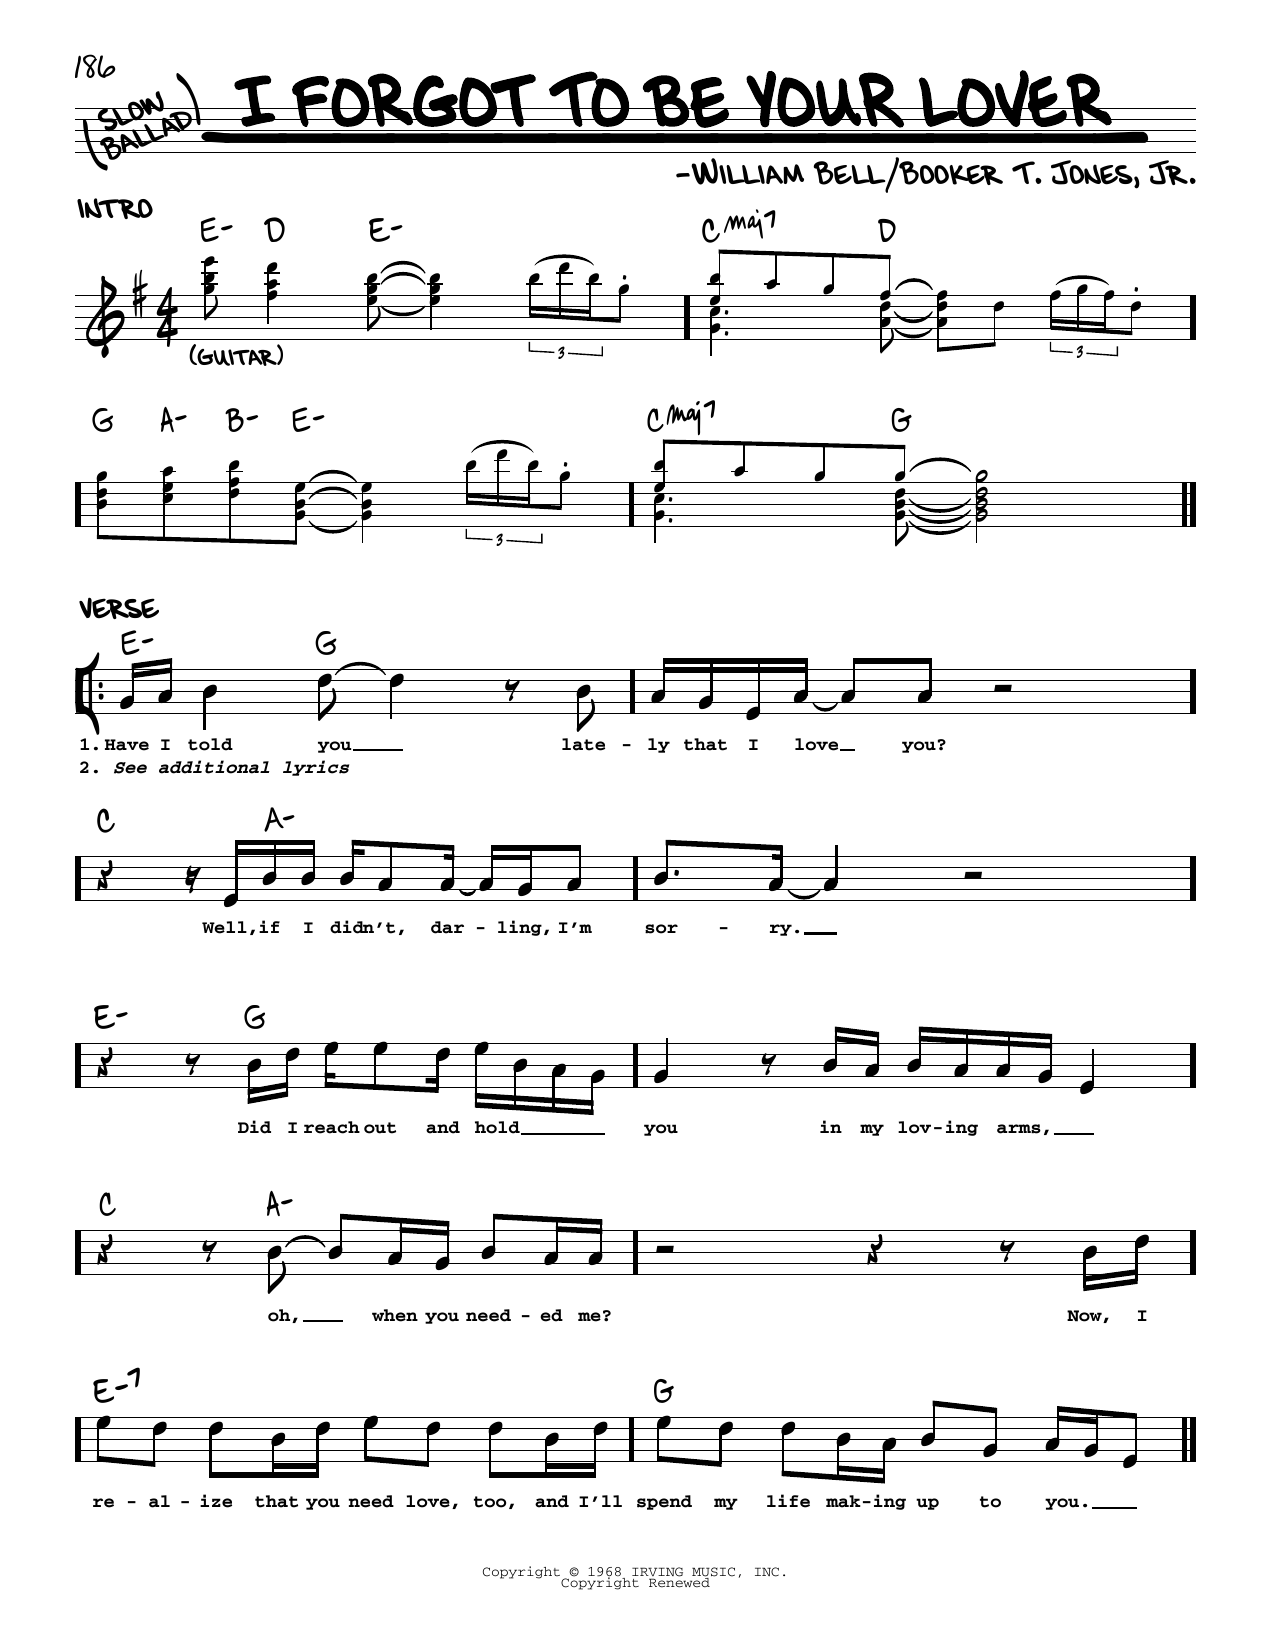 Download William Bell I Forgot To Be Your Lover Sheet Music